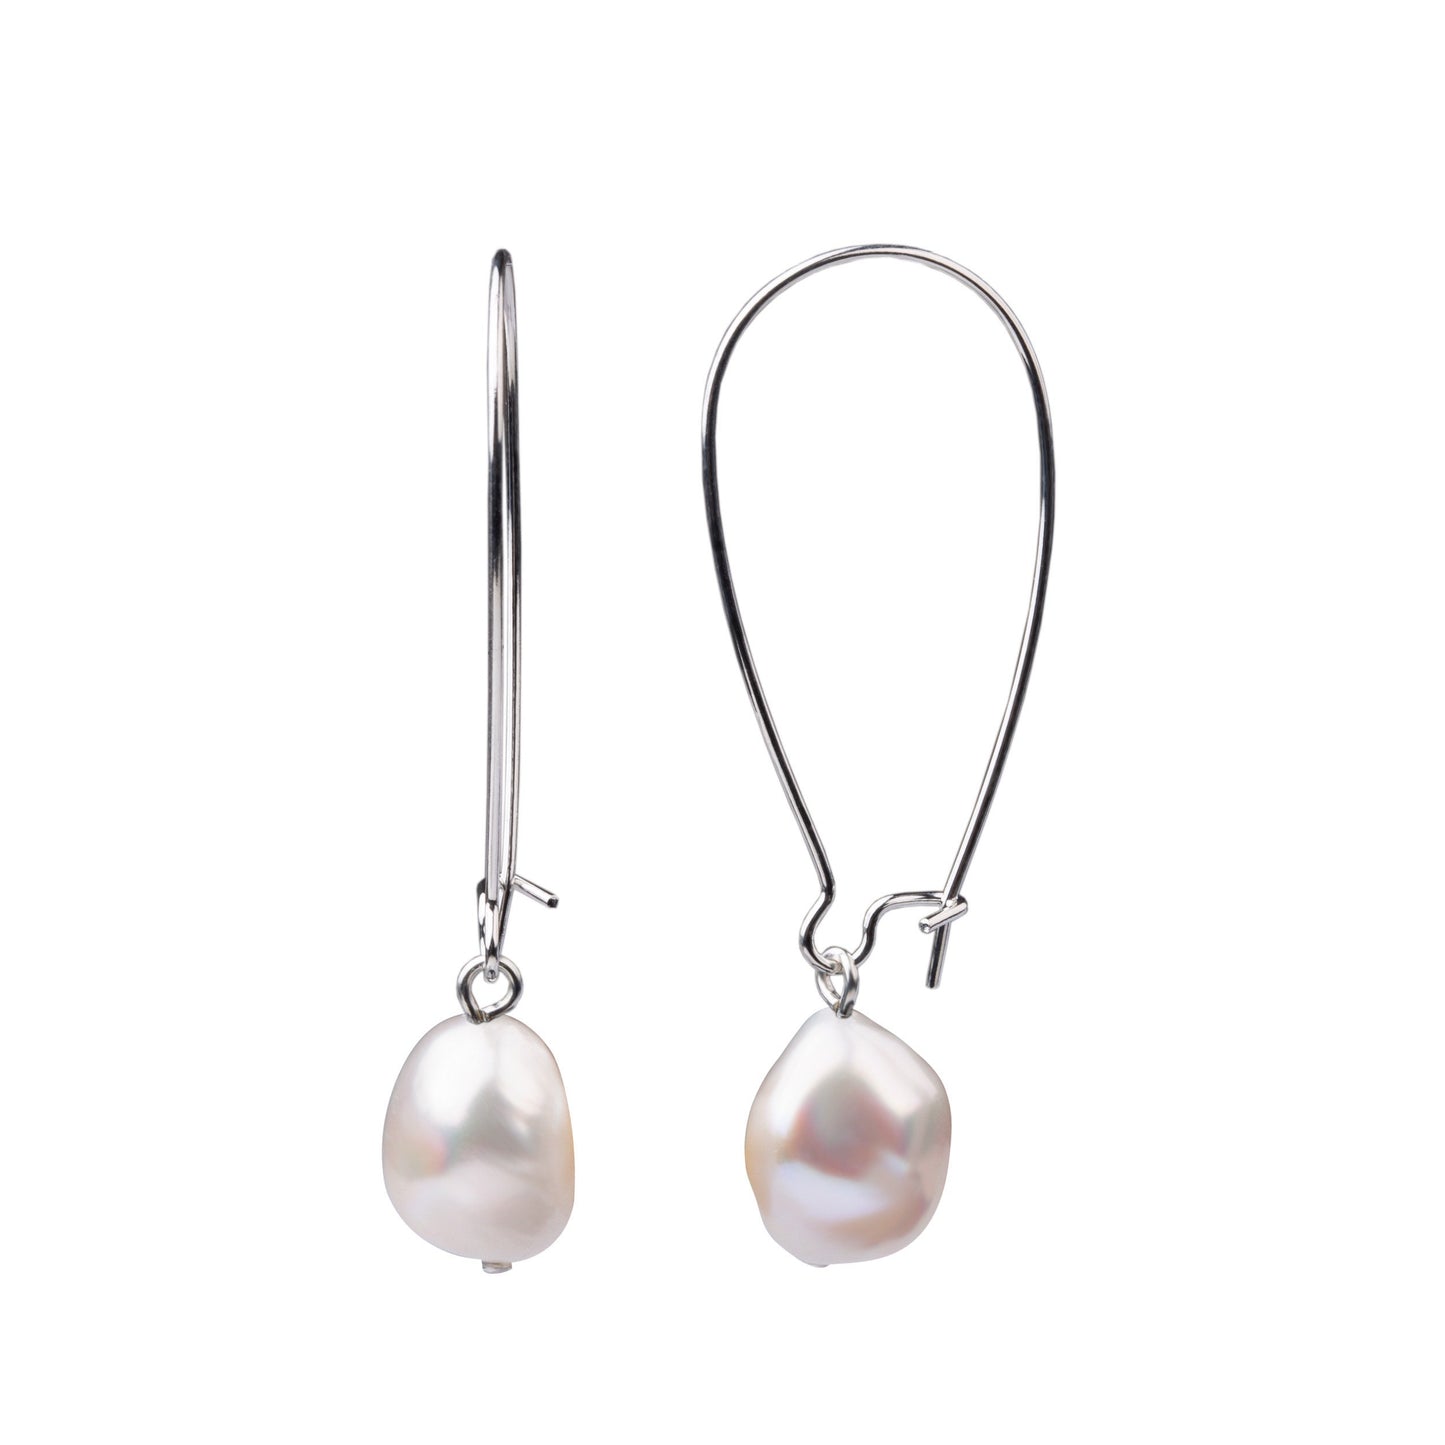 Faux Pearl Grey Earring Hand Crafted by Savvy Design